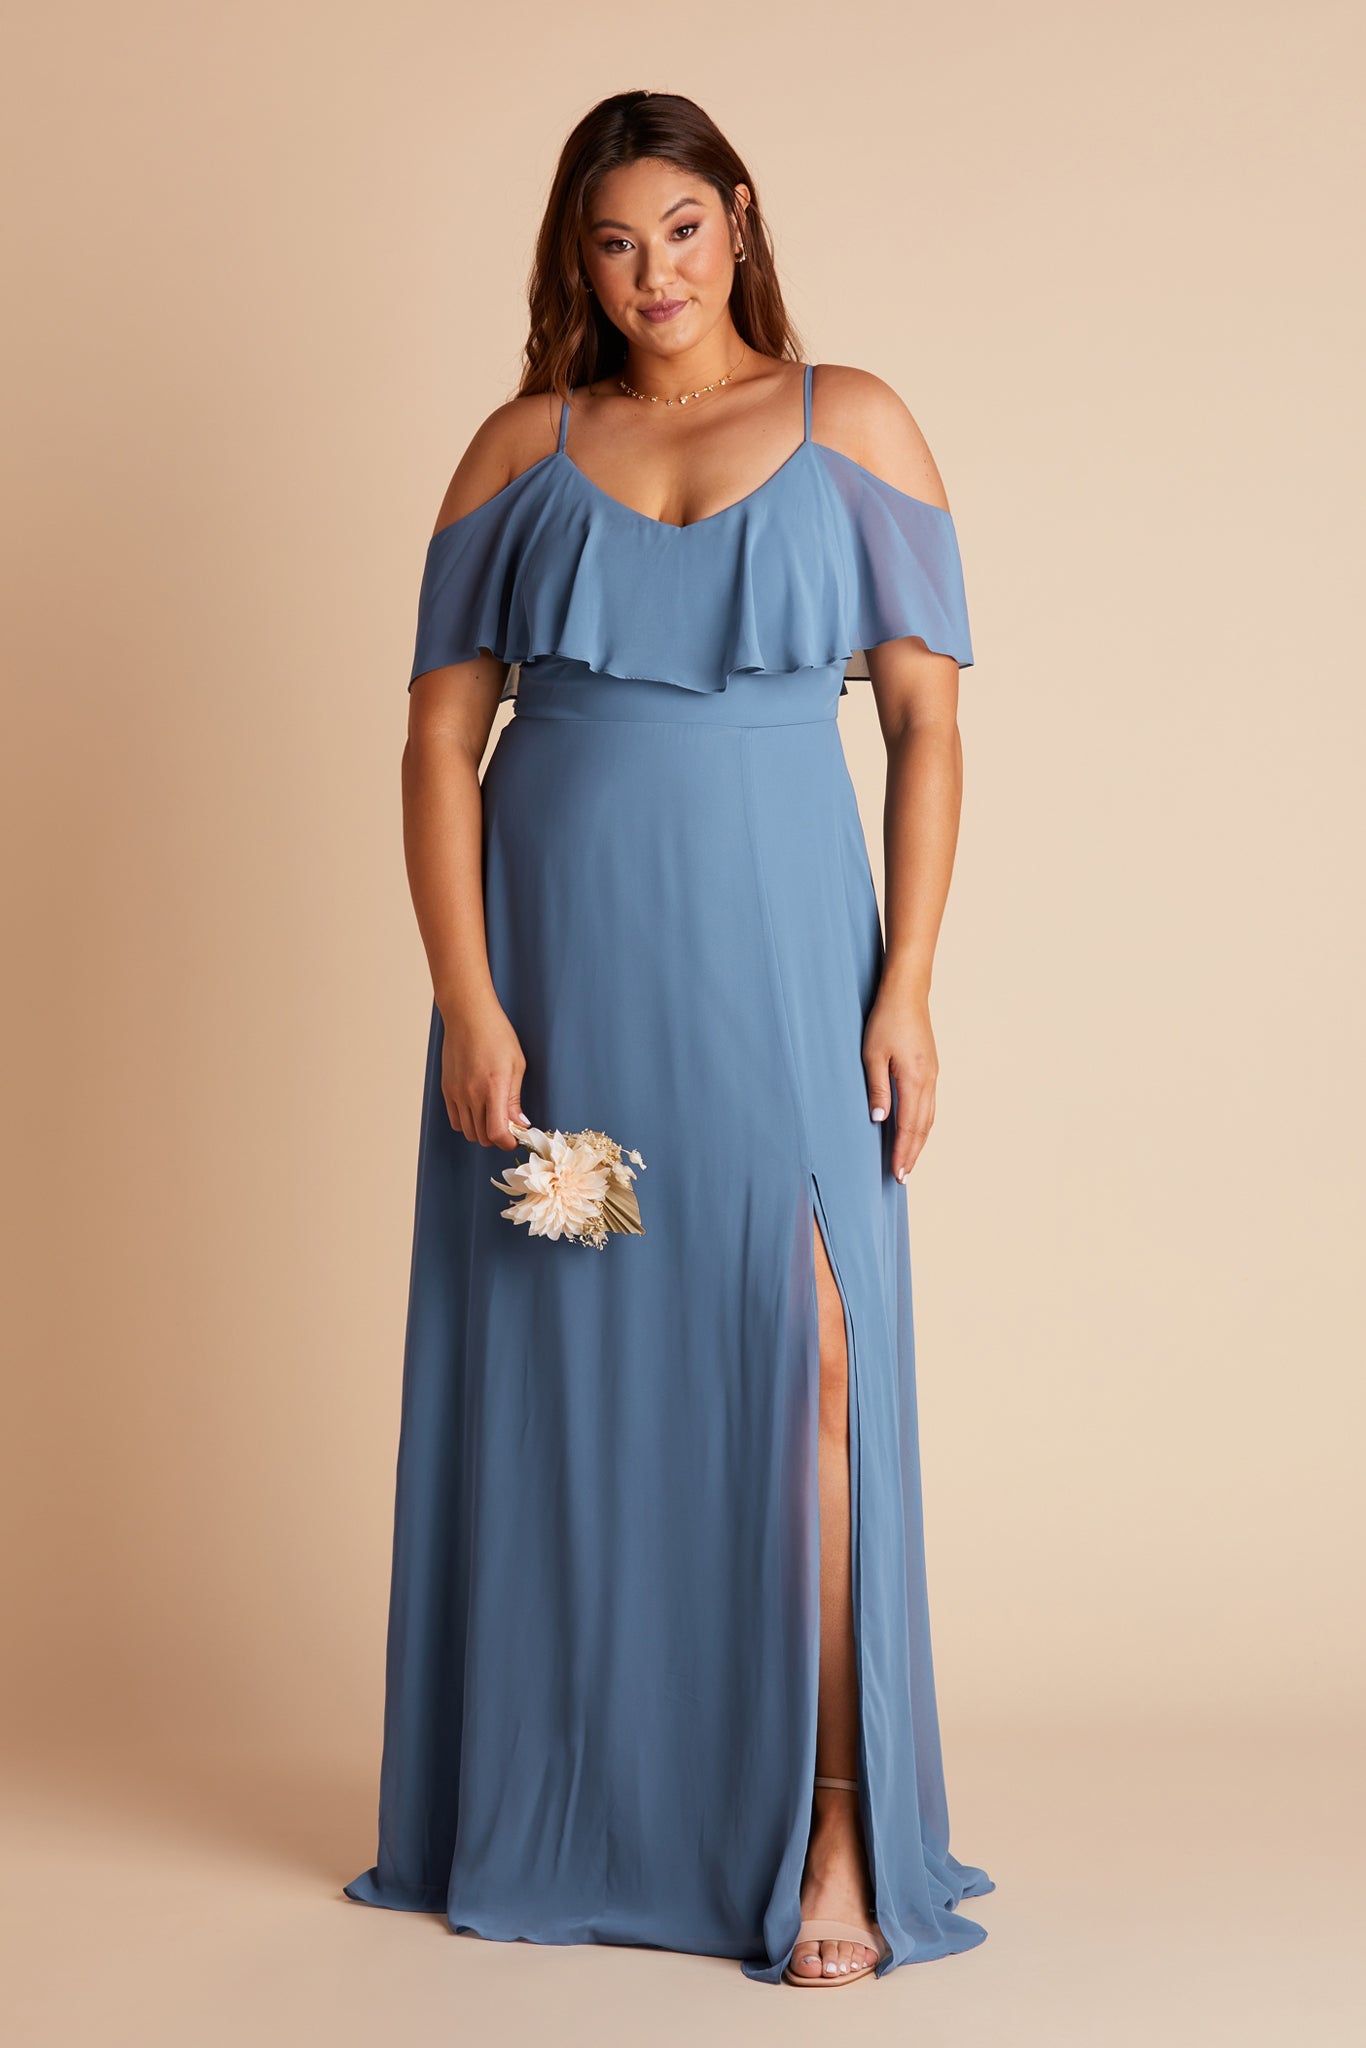 Jane convertible plus size bridesmaid dress with slit in twilight blue chiffon by Birdy Grey, front view